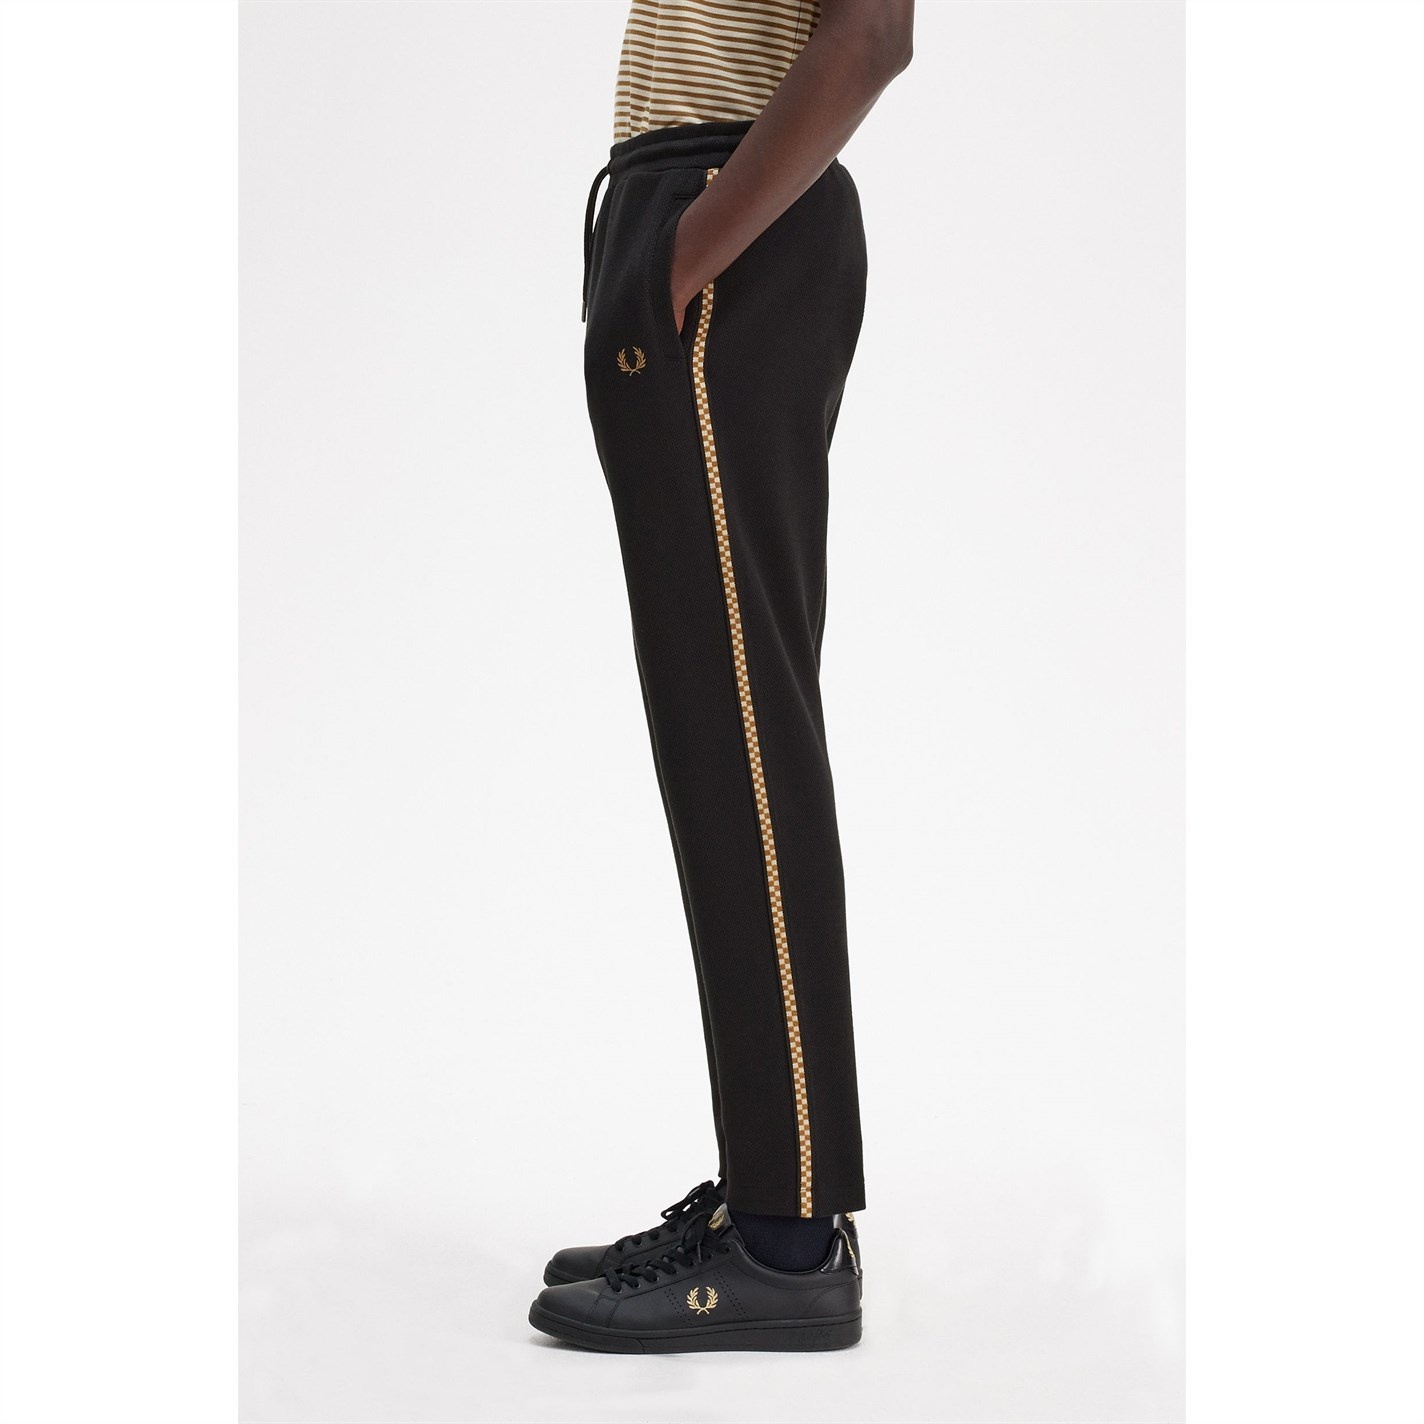 Fred Cheq Tape Pant Sn34 - 6